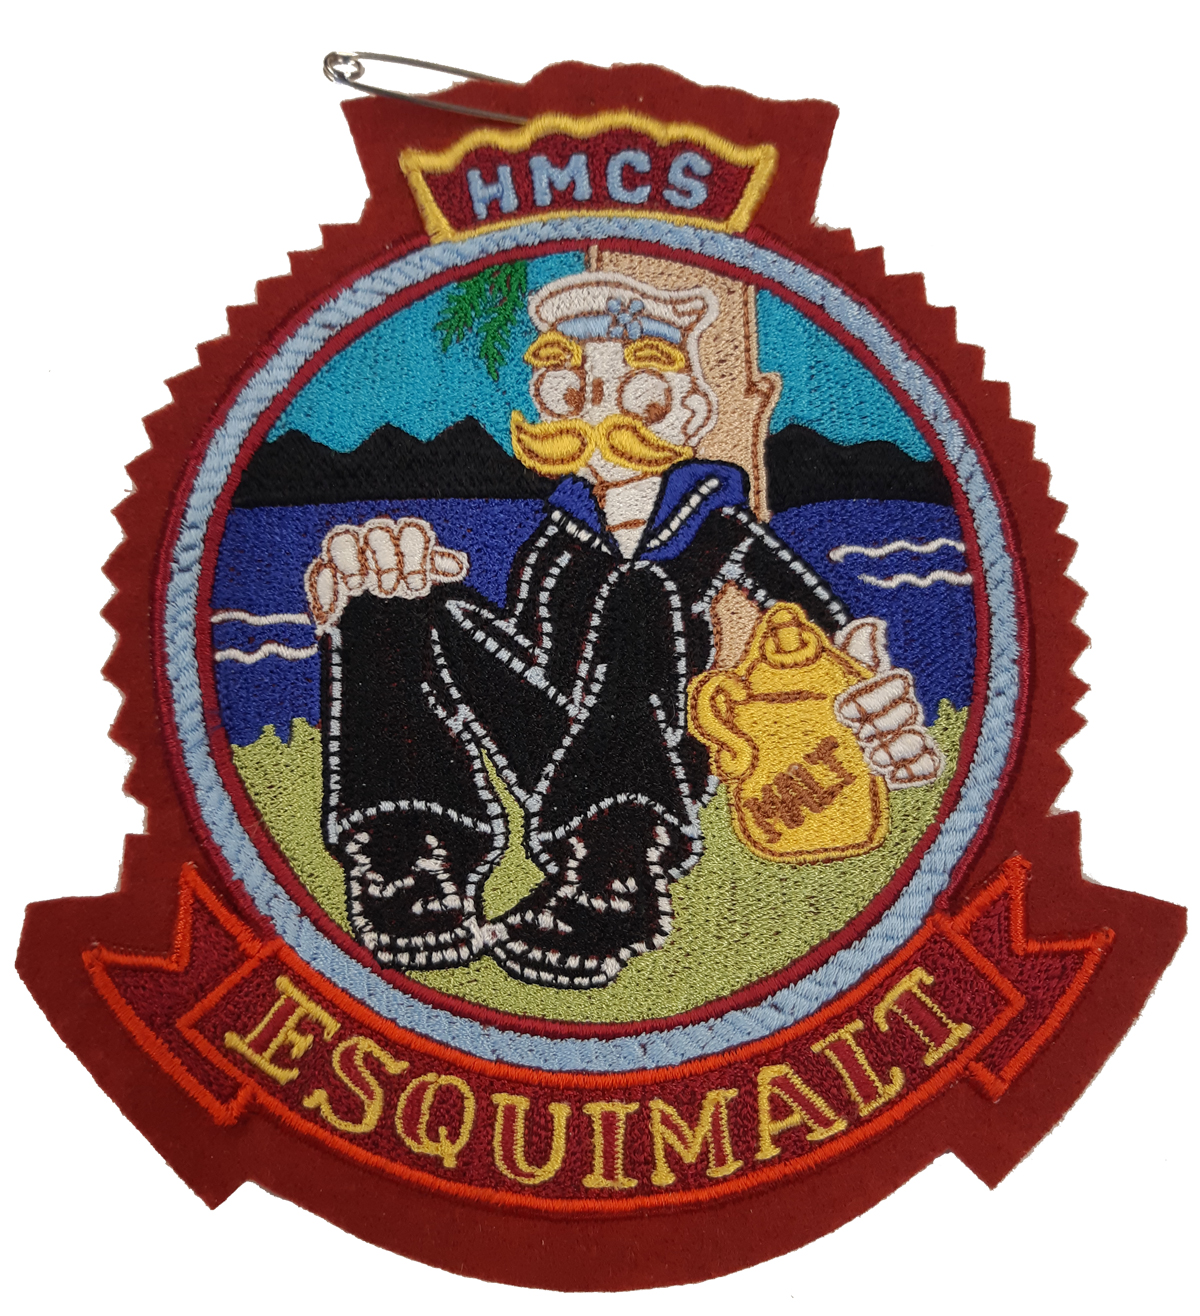 A morale patch of HMCS Esquimalt presented by Ralph Zbarsky to members of the CFB Esquimalt Naval and Military Museum. 